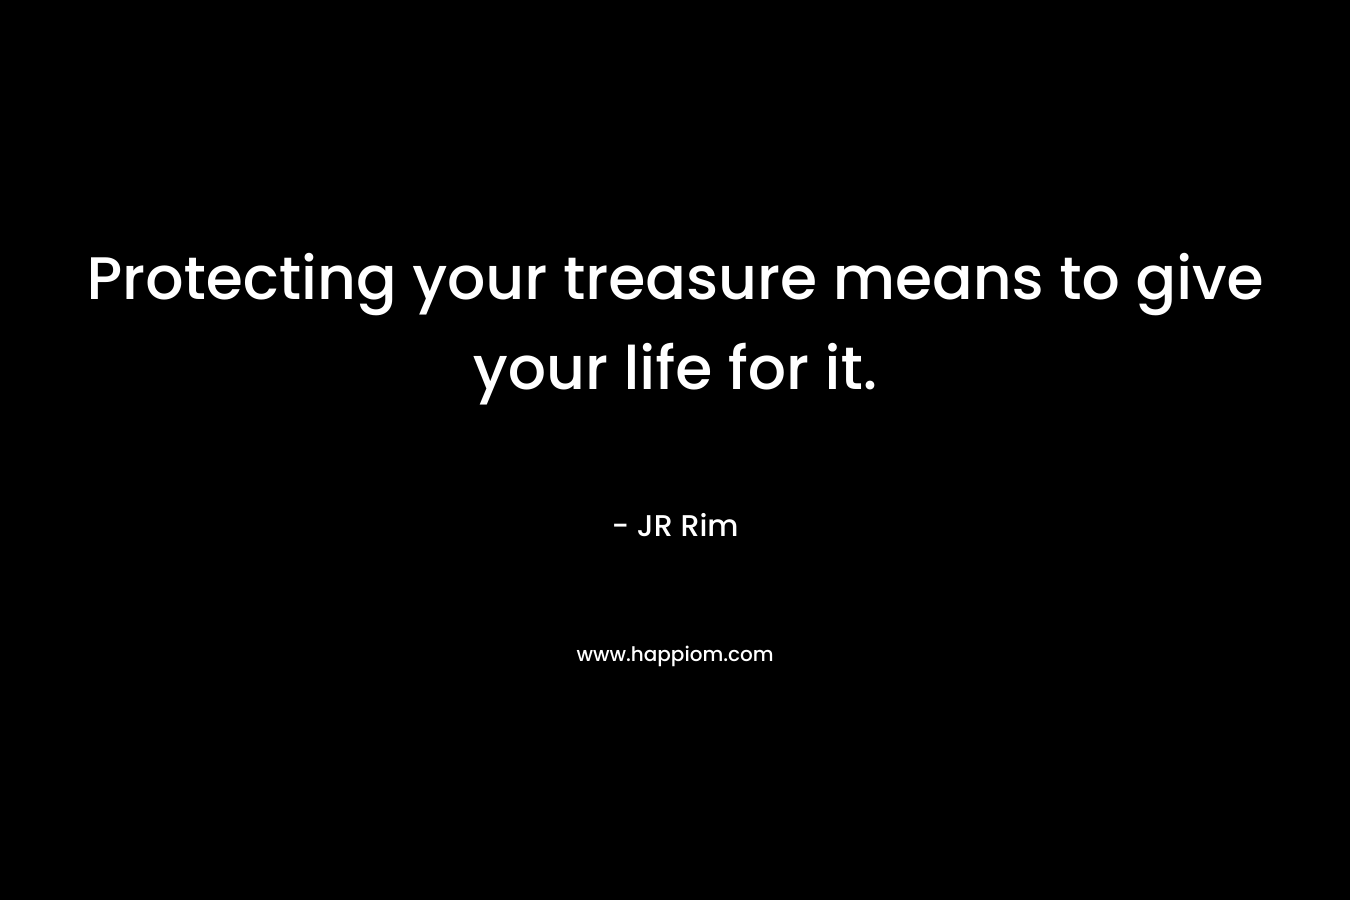 Protecting your treasure means to give your life for it.